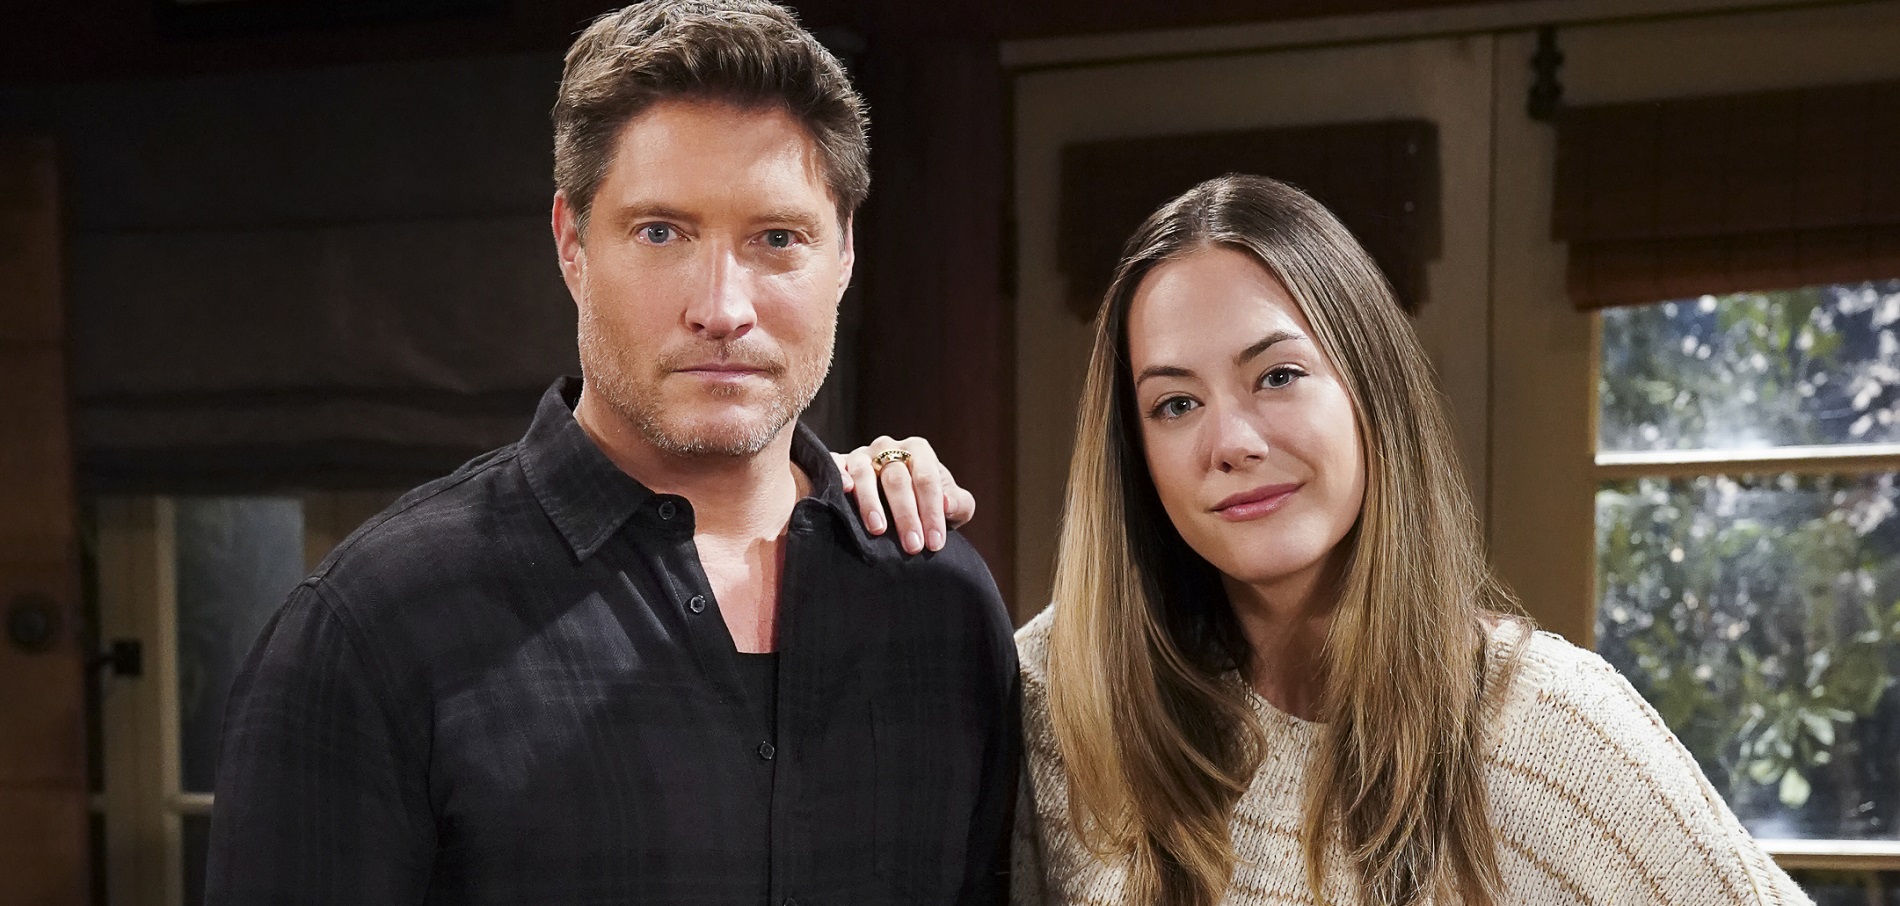 The Bold and the Beautiful weekly recap focuses on Deacon Sharpe, L, in a plaid shirt, and his daughter Hope, R, in a white sweater